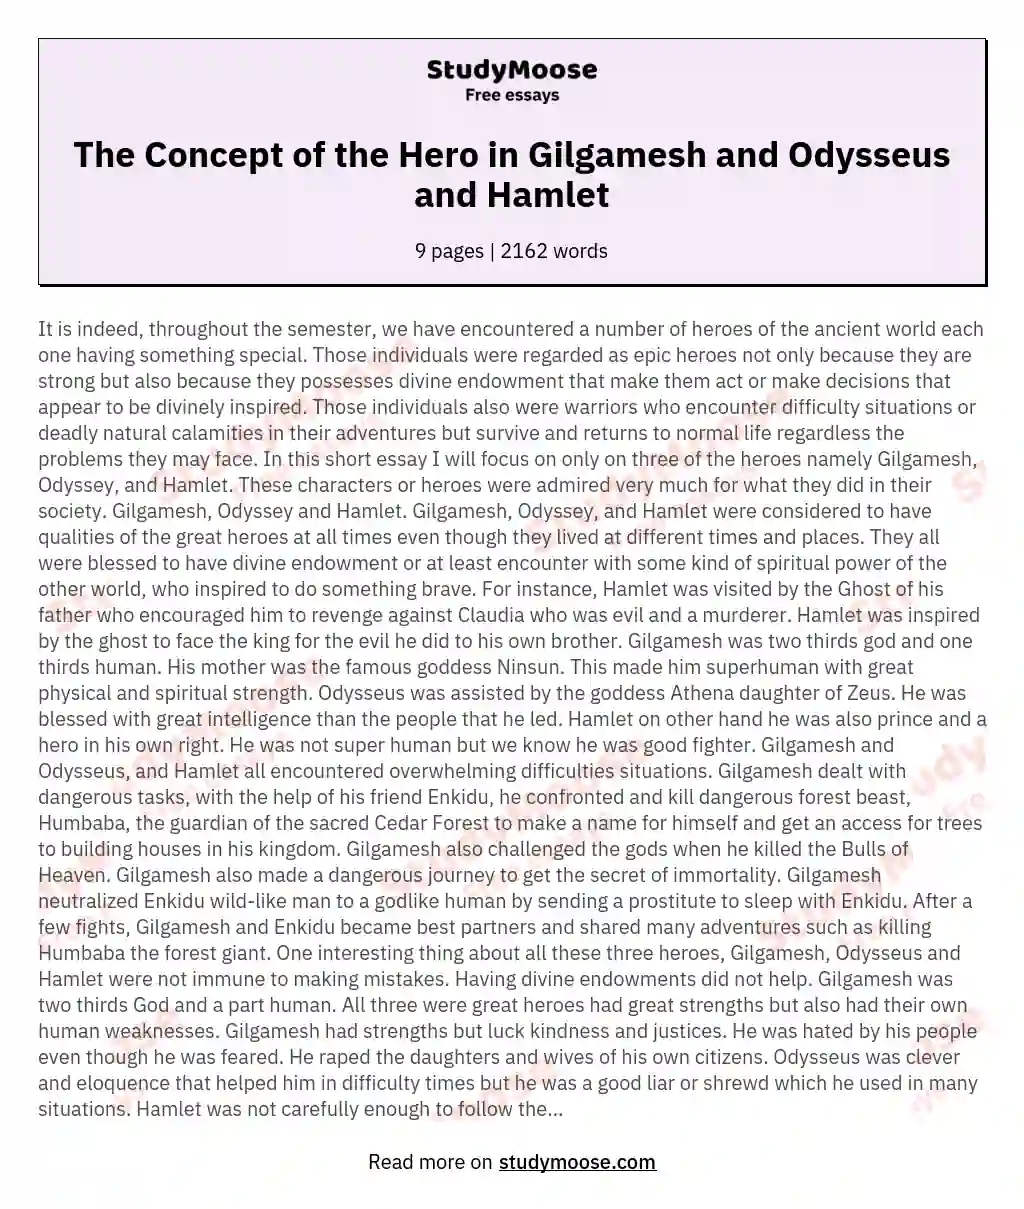 The Concept of the Hero in Gilgamesh and Odysseus and Hamlet essay